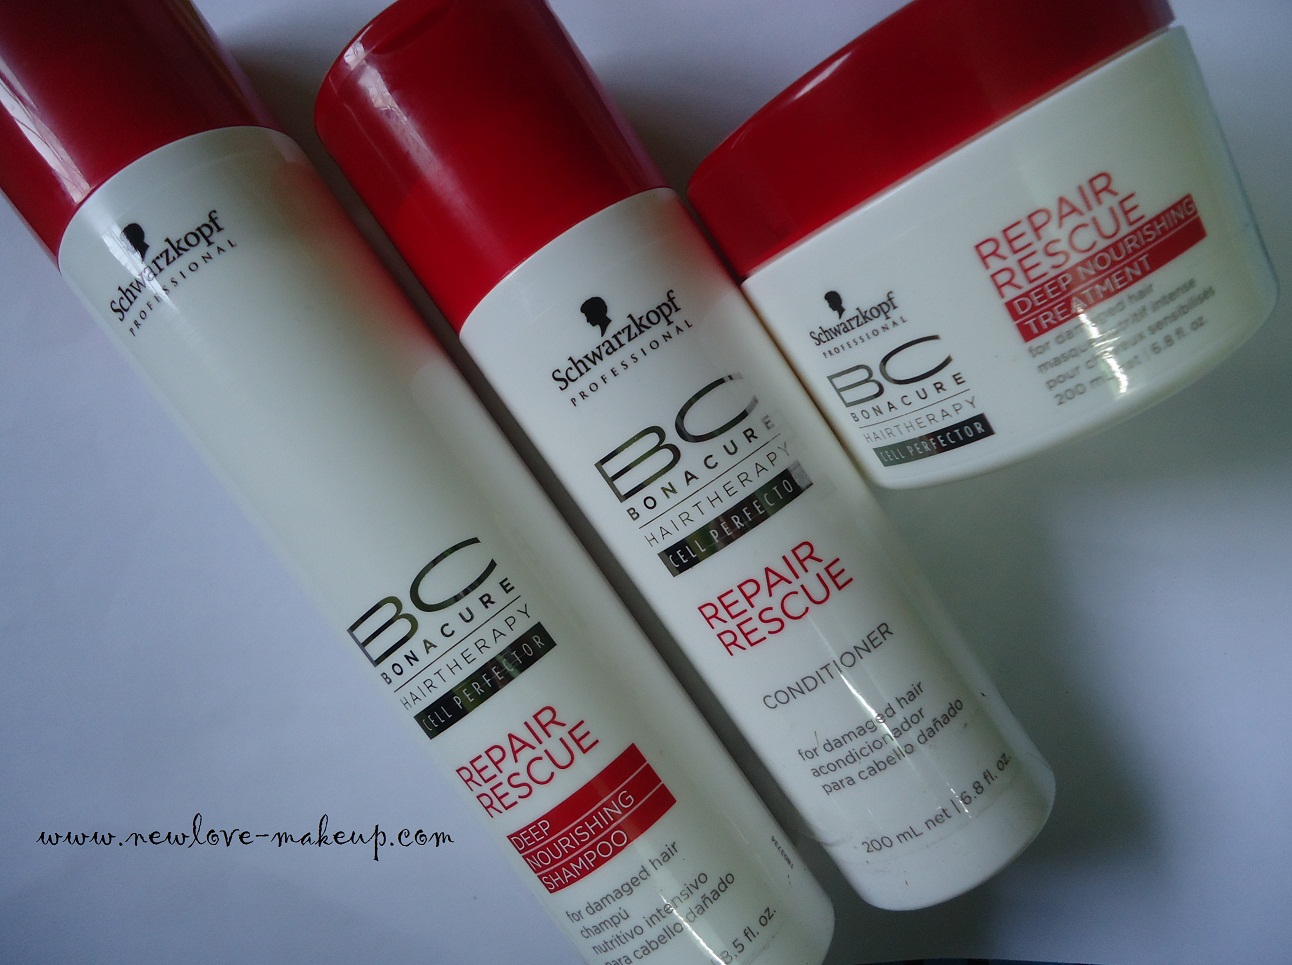 Schwarzkopf BC Cell Therapy Repair Rescue Range Review - New Love - Makeup